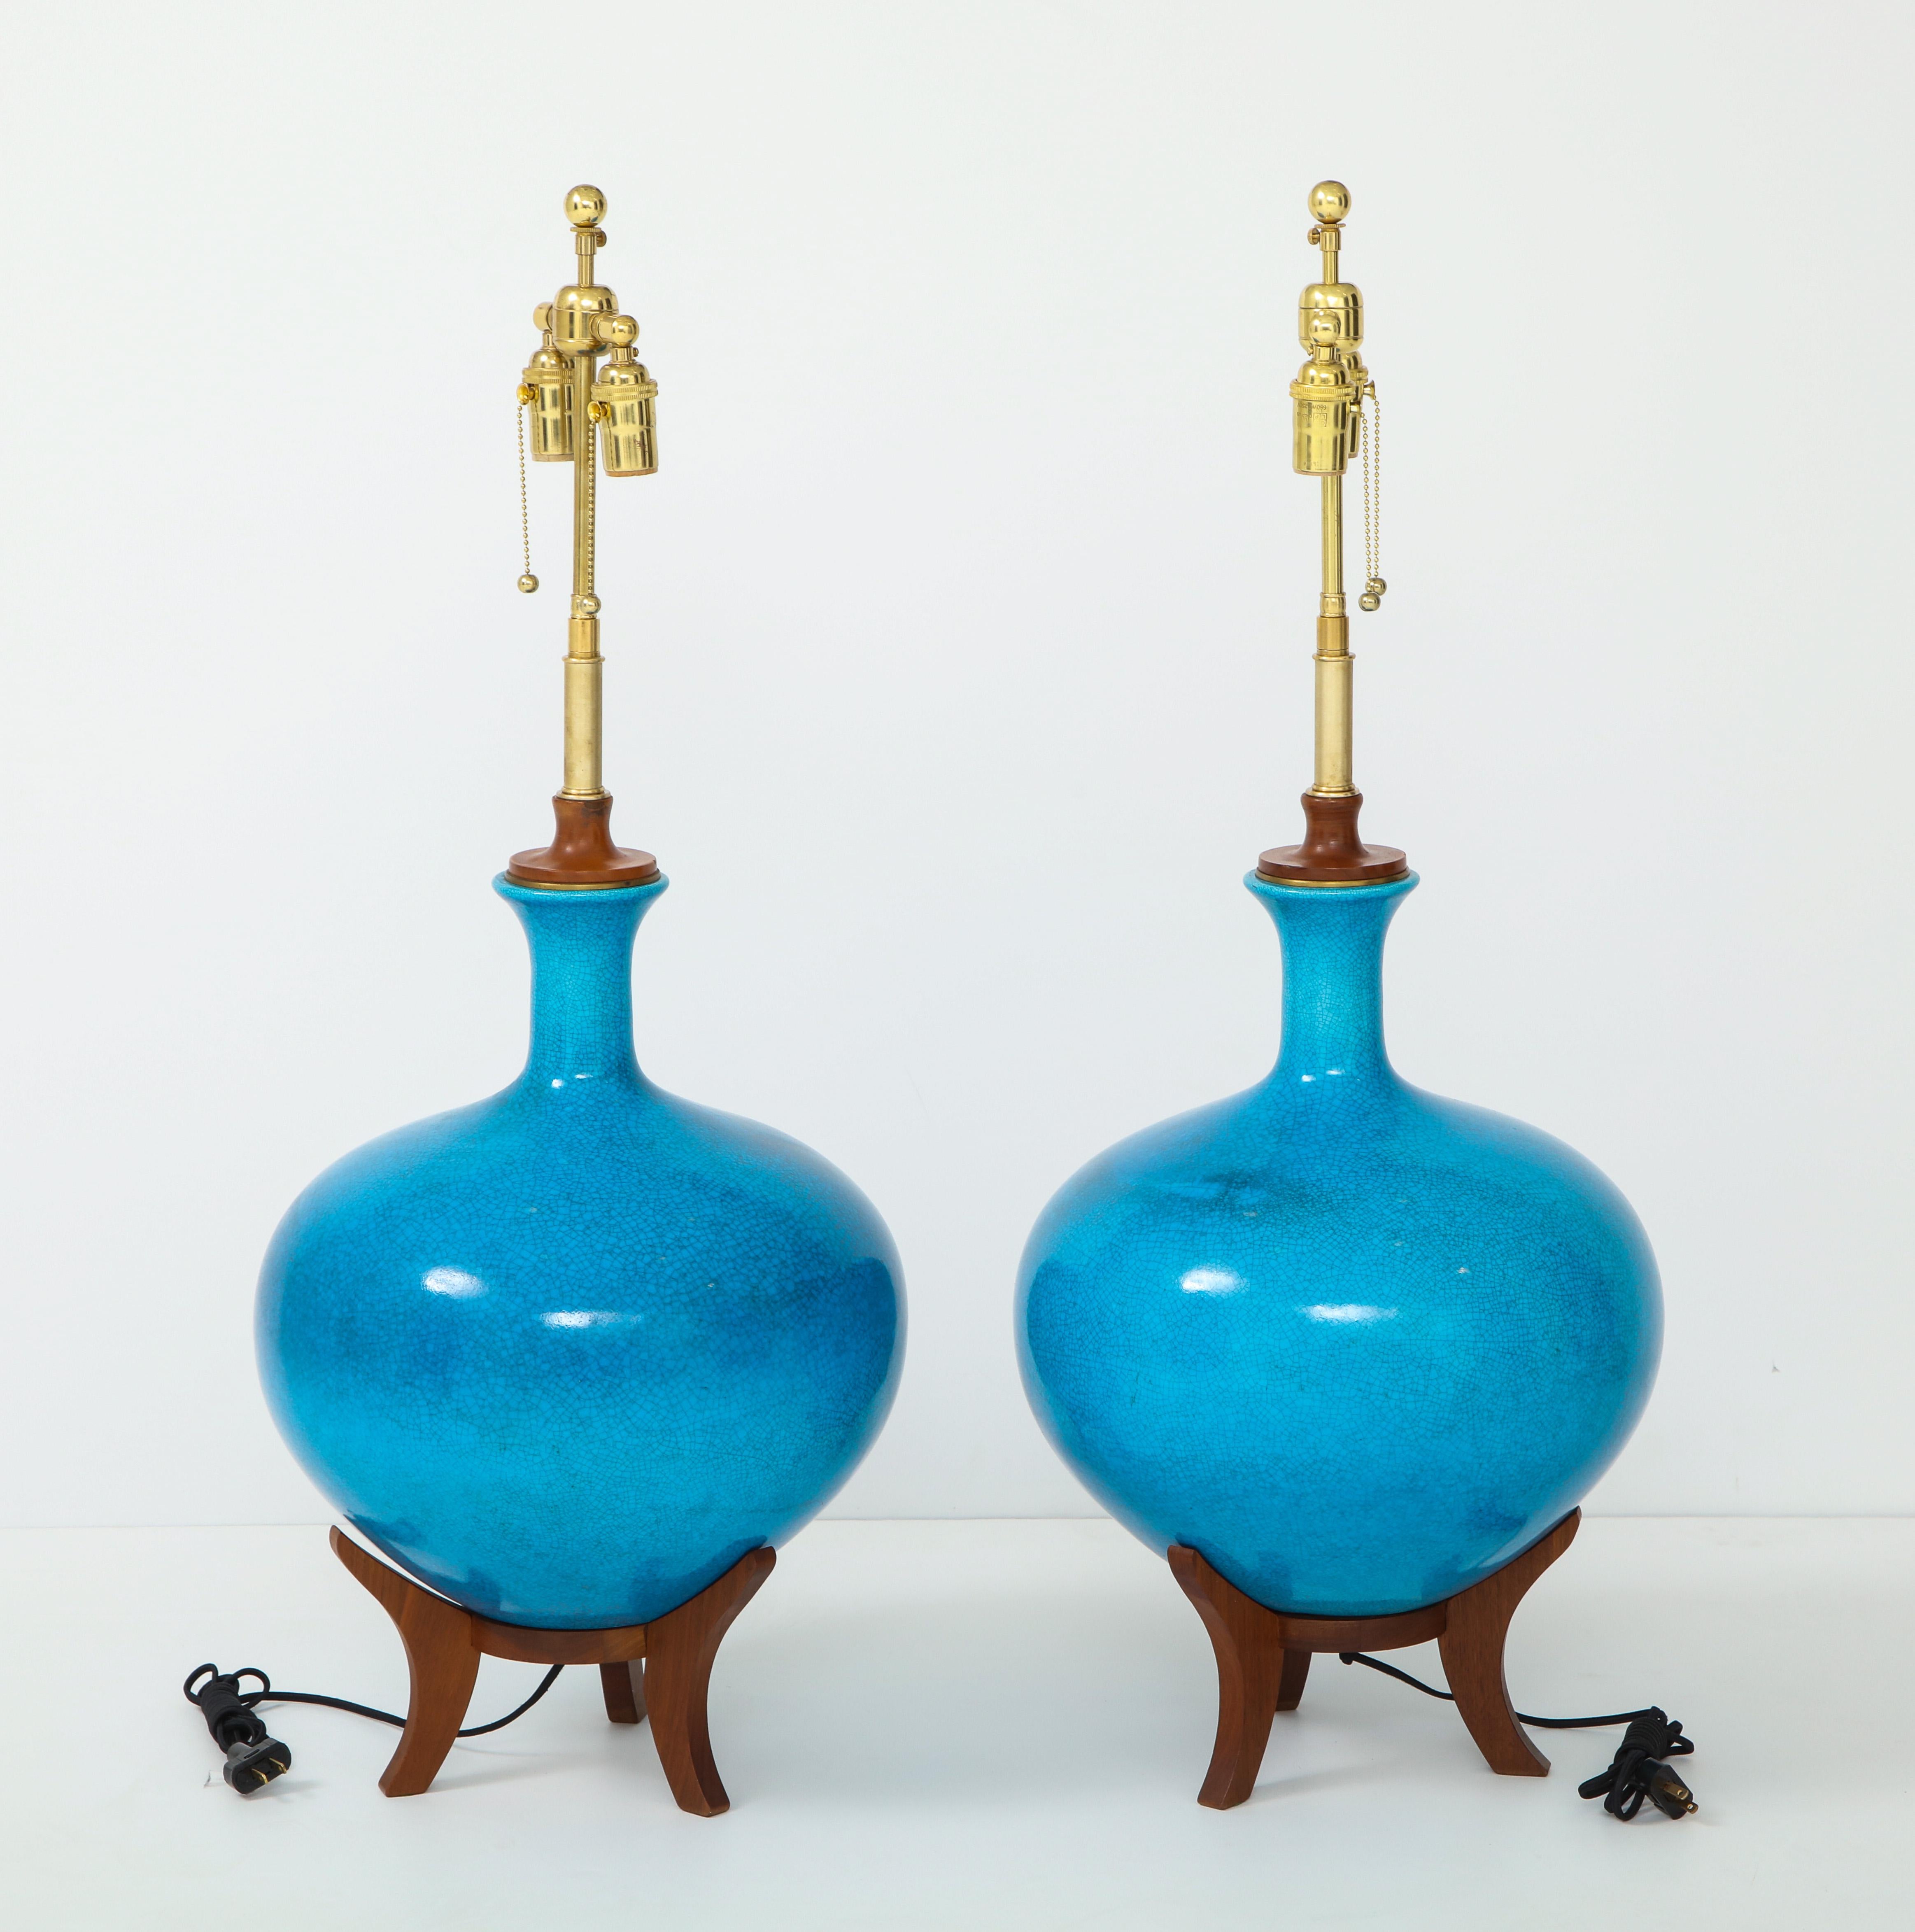 Fabulous pair of midcentury lamps by Frederick Cooper.
The lamps have a stunning cerulean blue crackle glazed finish and they
sit on wooden bases.
They have been newly rewired with polished brass double clusters.
 